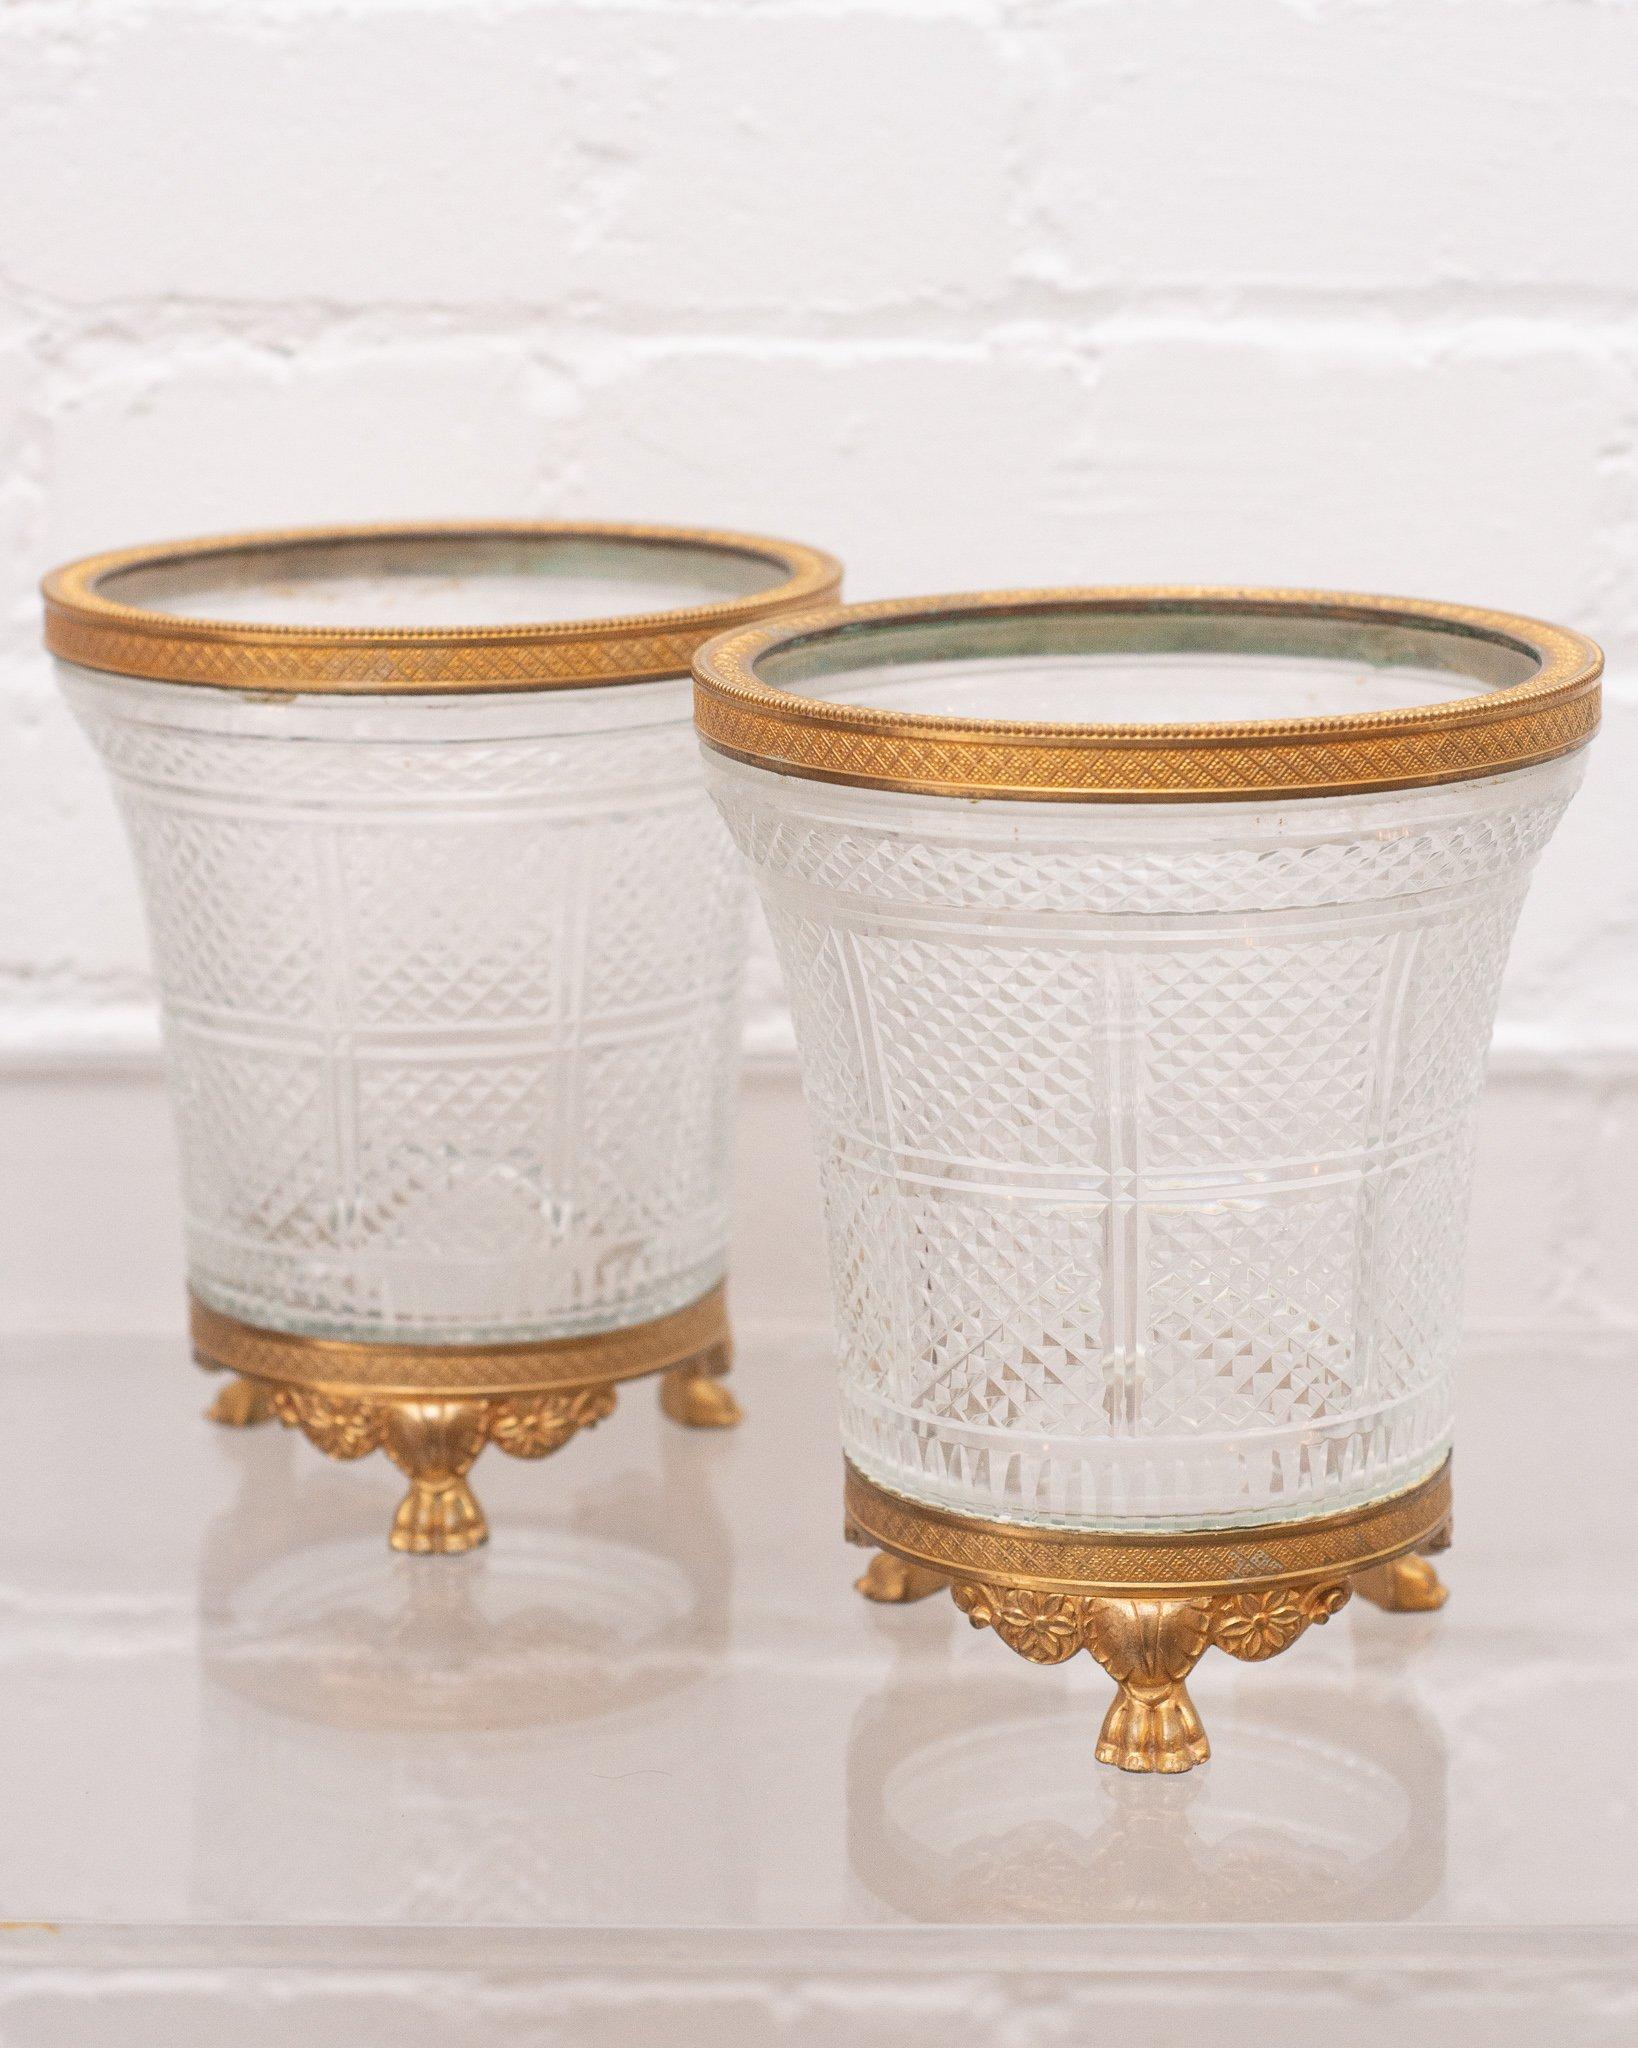 A stunning pair of antique Baccarat cut crystal and bronze vases, circa 1900. These exceptional works are in excellent condition for their age and unsigned, typical of turn-of-the-century Baccarat.